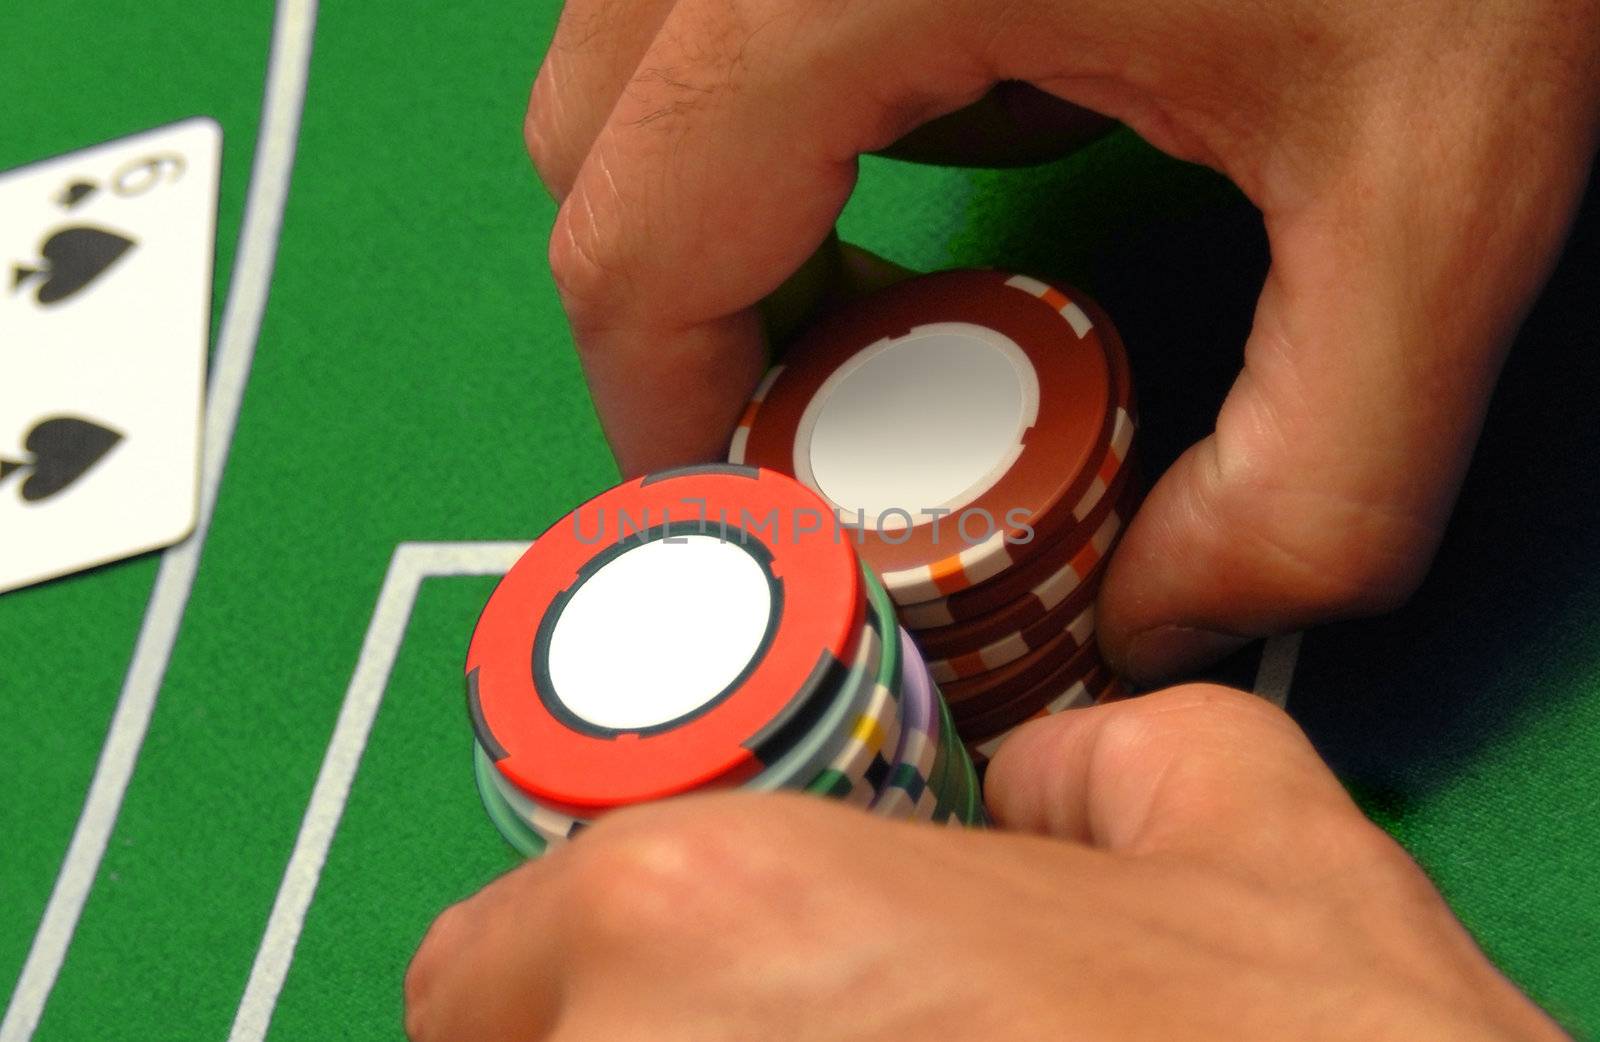 Casino chips for poker, blackjack or other table game. Male hands of a gambler on green background.